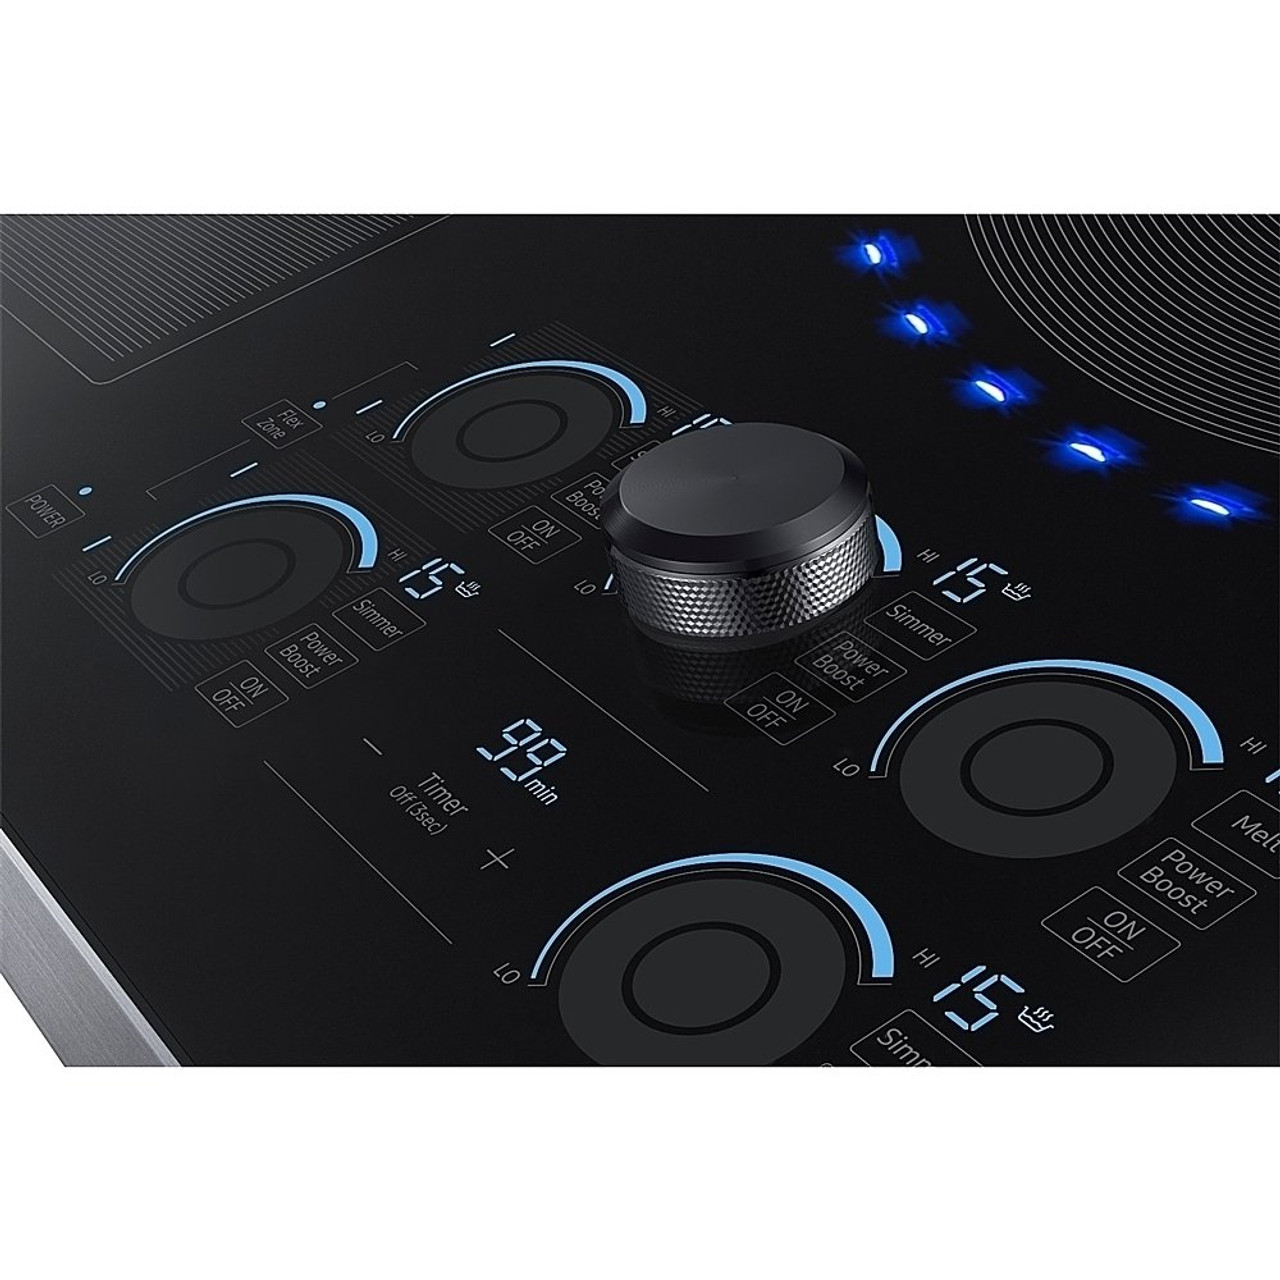 Samsung NZ36K788OUG 36" Smart Induction Cooktop in Stainless Steel